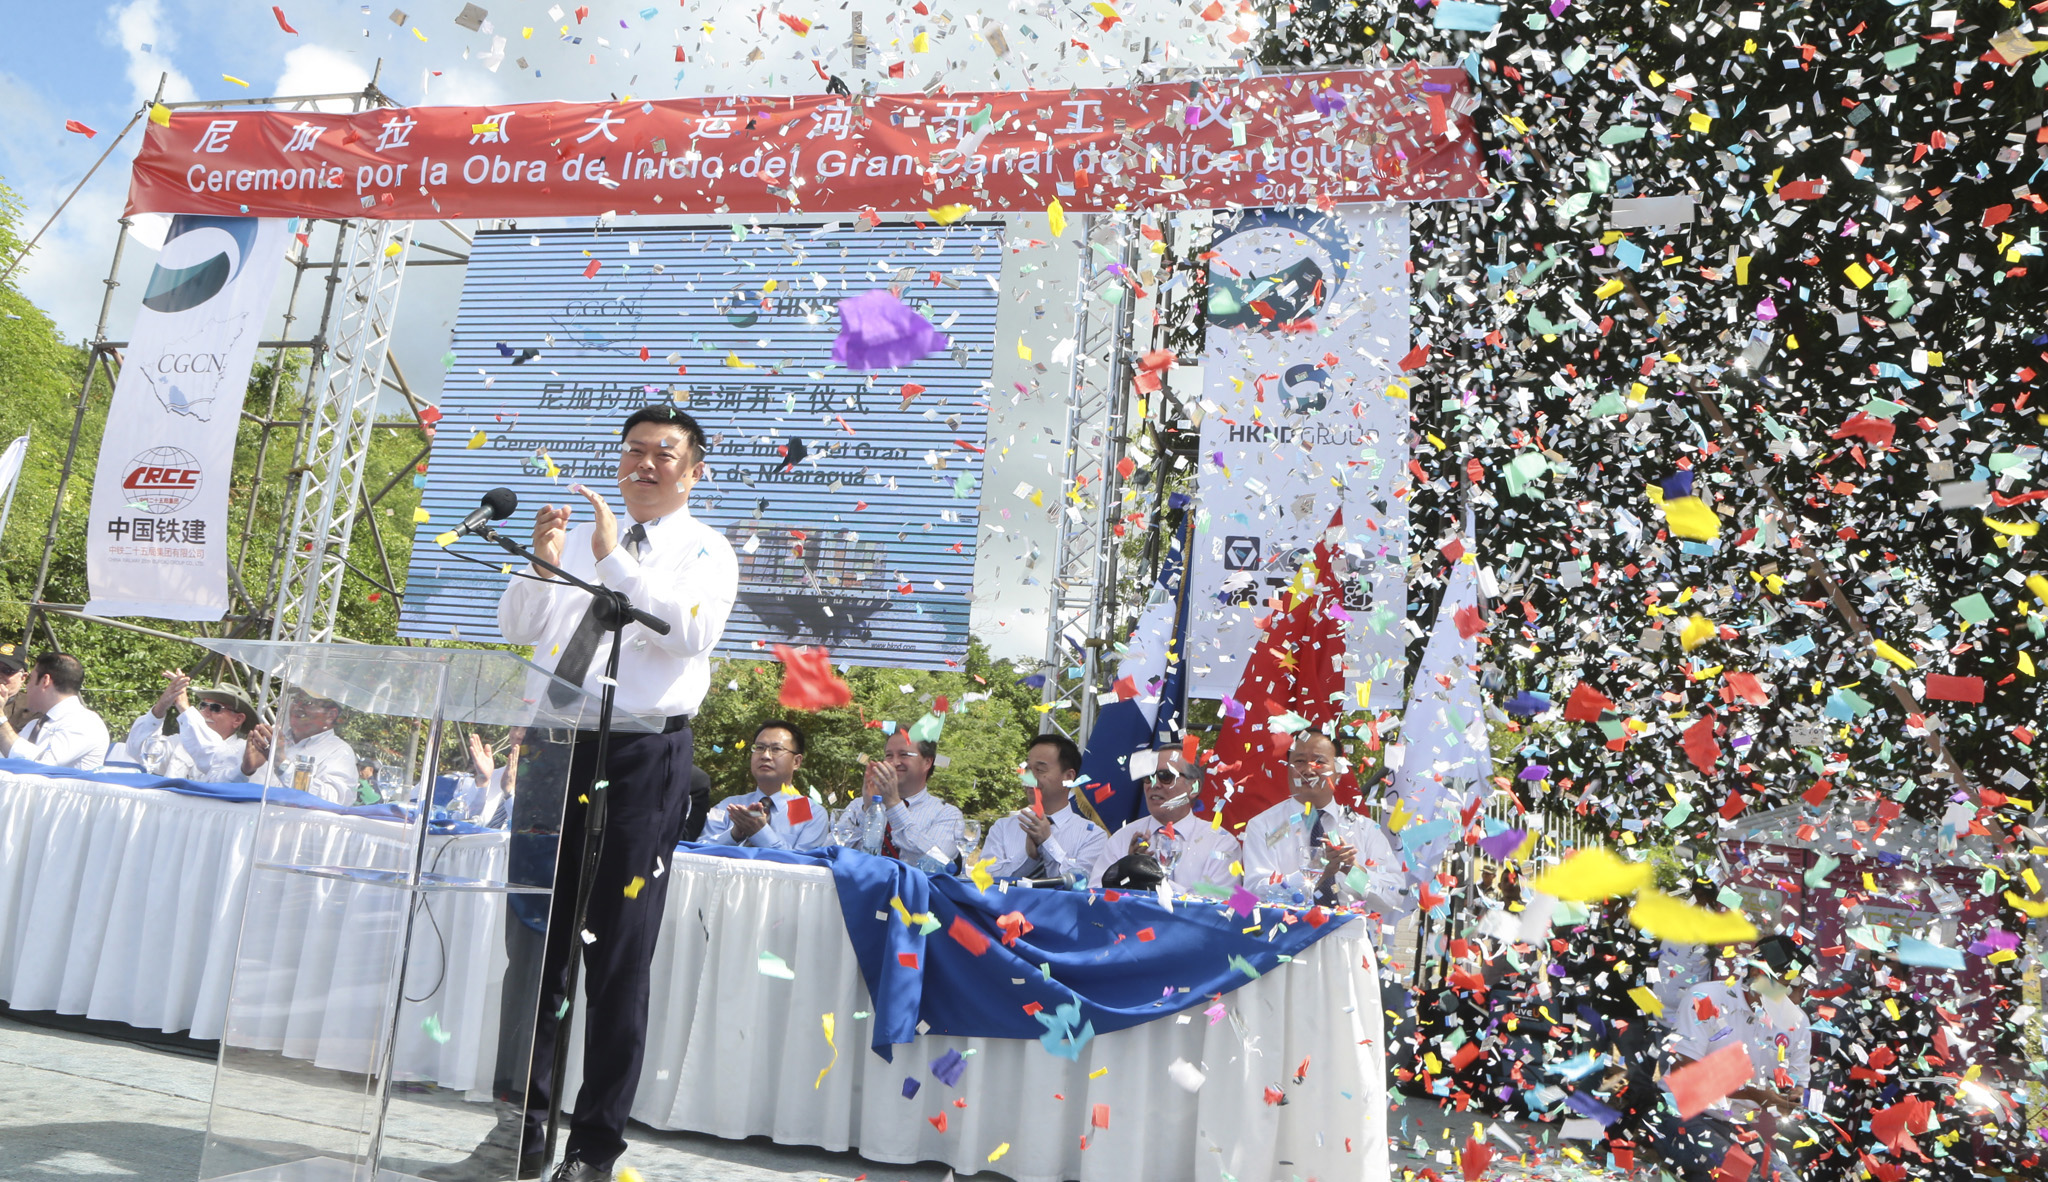 HK Nicaragua Canal Development Investment Co Ltd Chairman Wang Jing speaks during the start of the first works of the Interoceanic Grand Canal in Brito town Dec. 22, 2014 (Oswaldo Rivas—Reuters)